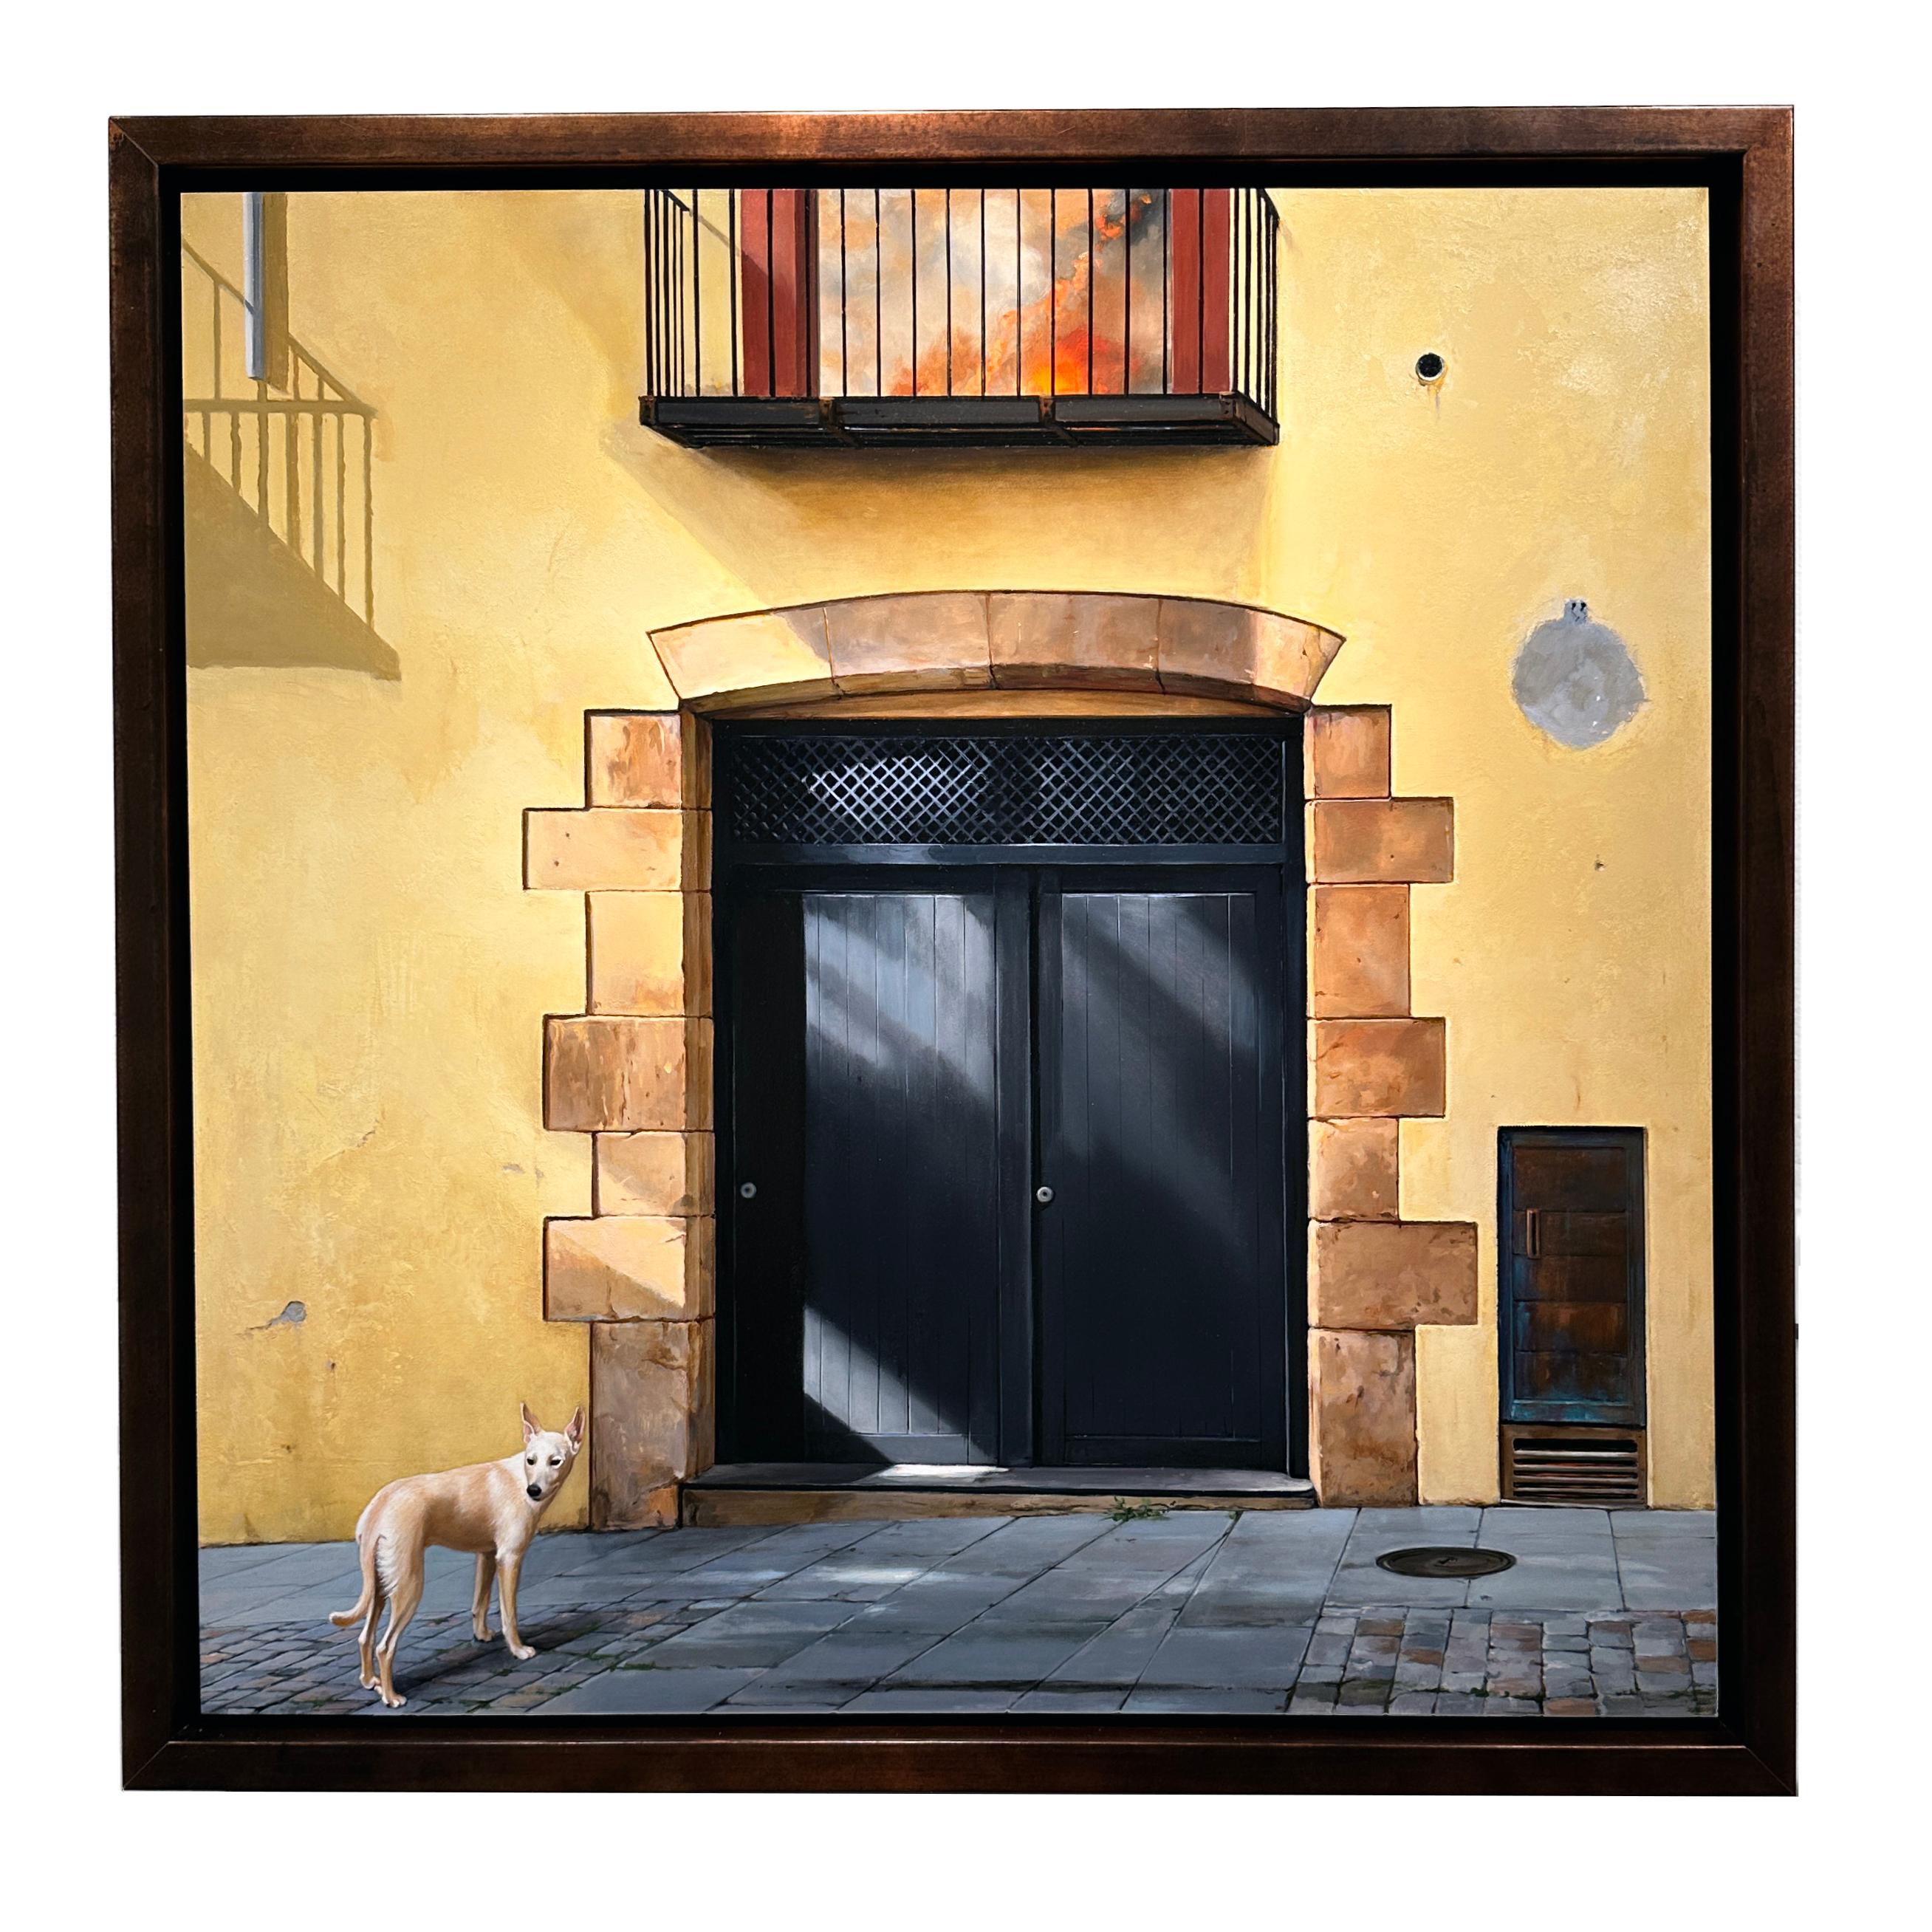 Sombras des Caldes (The Shadows of Caldes) - Architectural Imagery and a Dog  For Sale 6